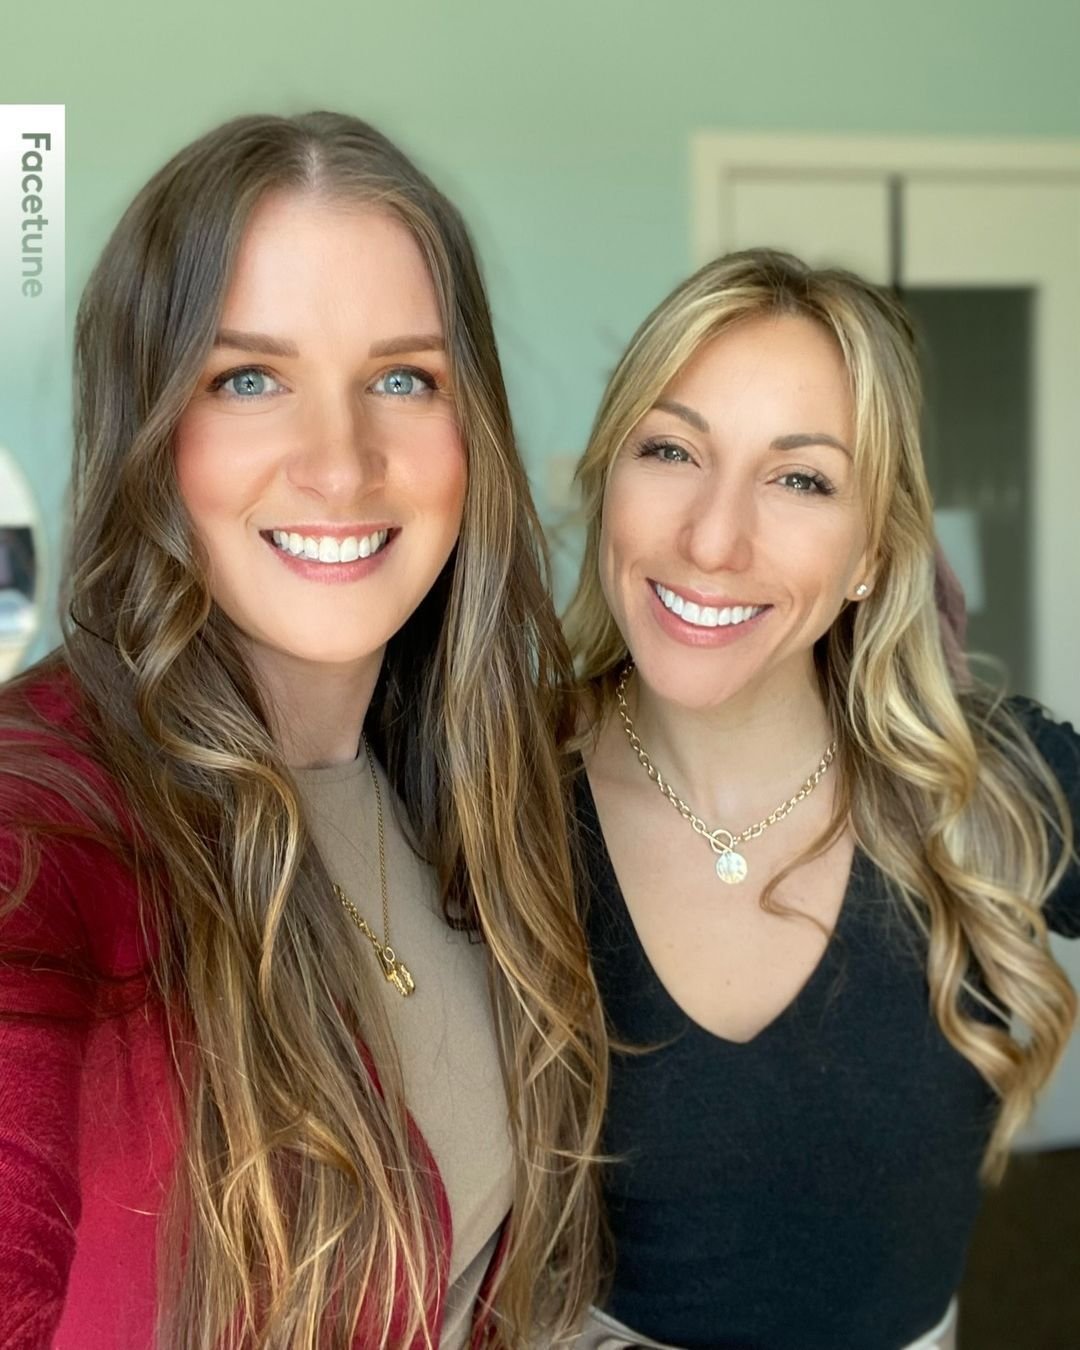 Hi from Amanda &amp; Melanie! 👋 We recently attended MEREDA's Morning Menu. This is a series held by the Maine Real Estate &amp; Development Association, where we met with experts from across the state to dissect market dynamics, analyze trends, and